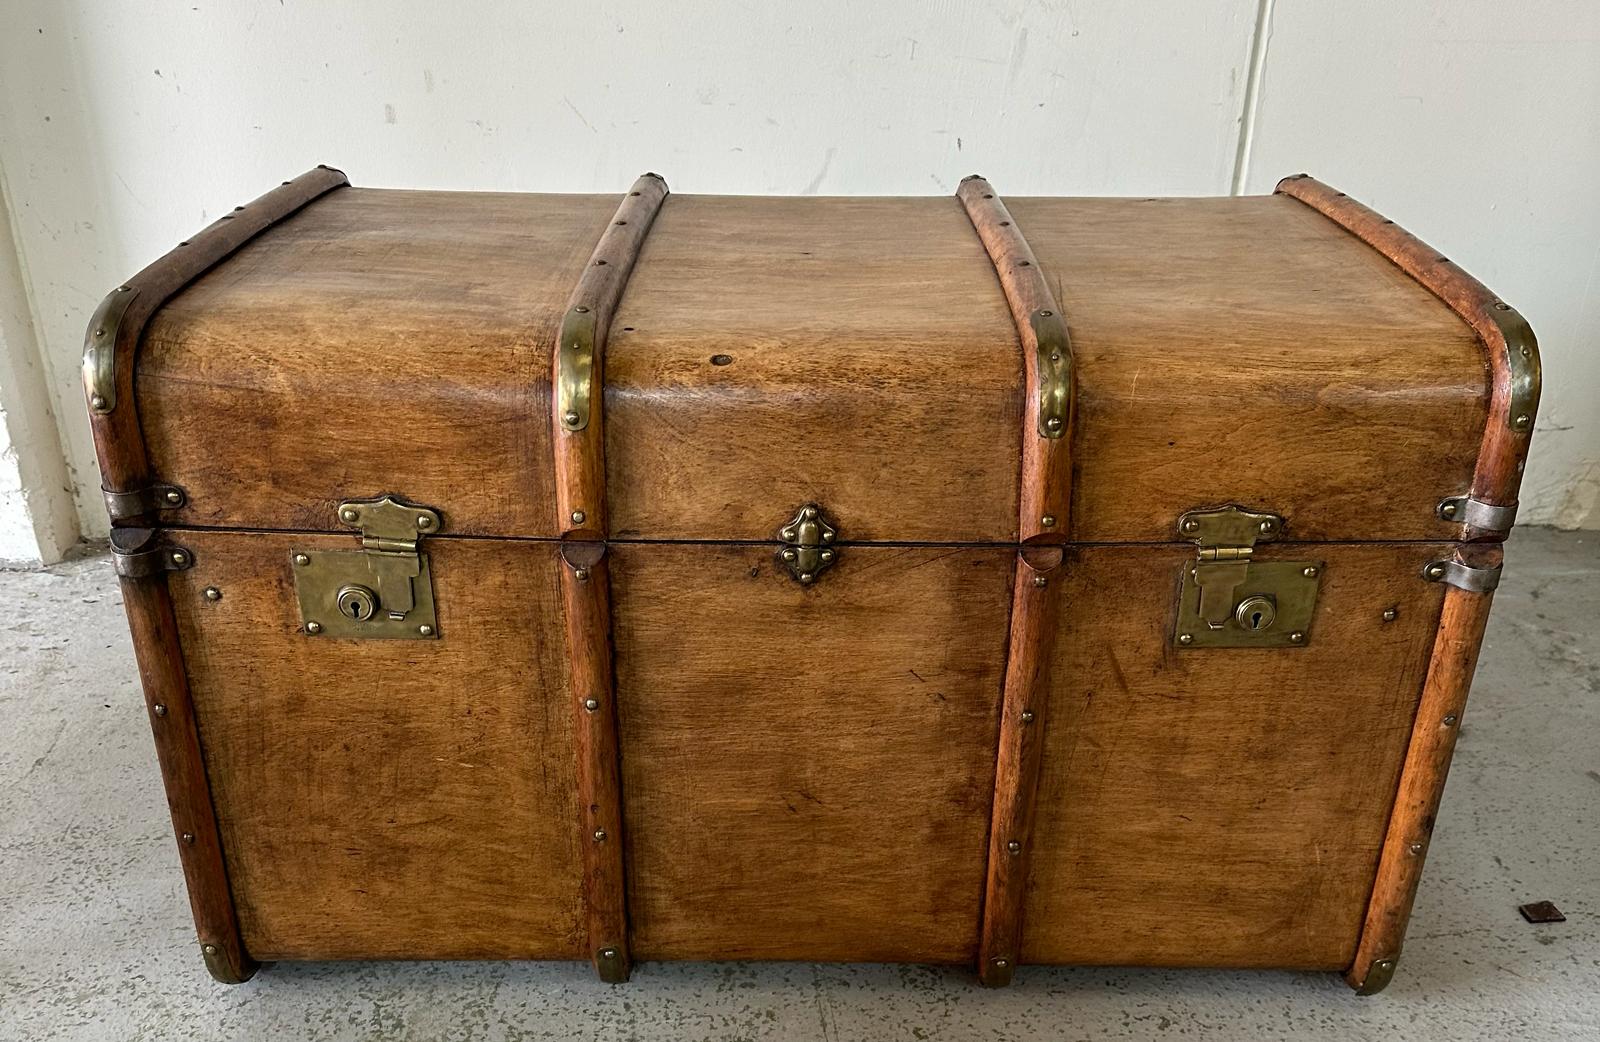 A vintage wooden banded steamer trunk with brass fittings and leather strap handles to ends